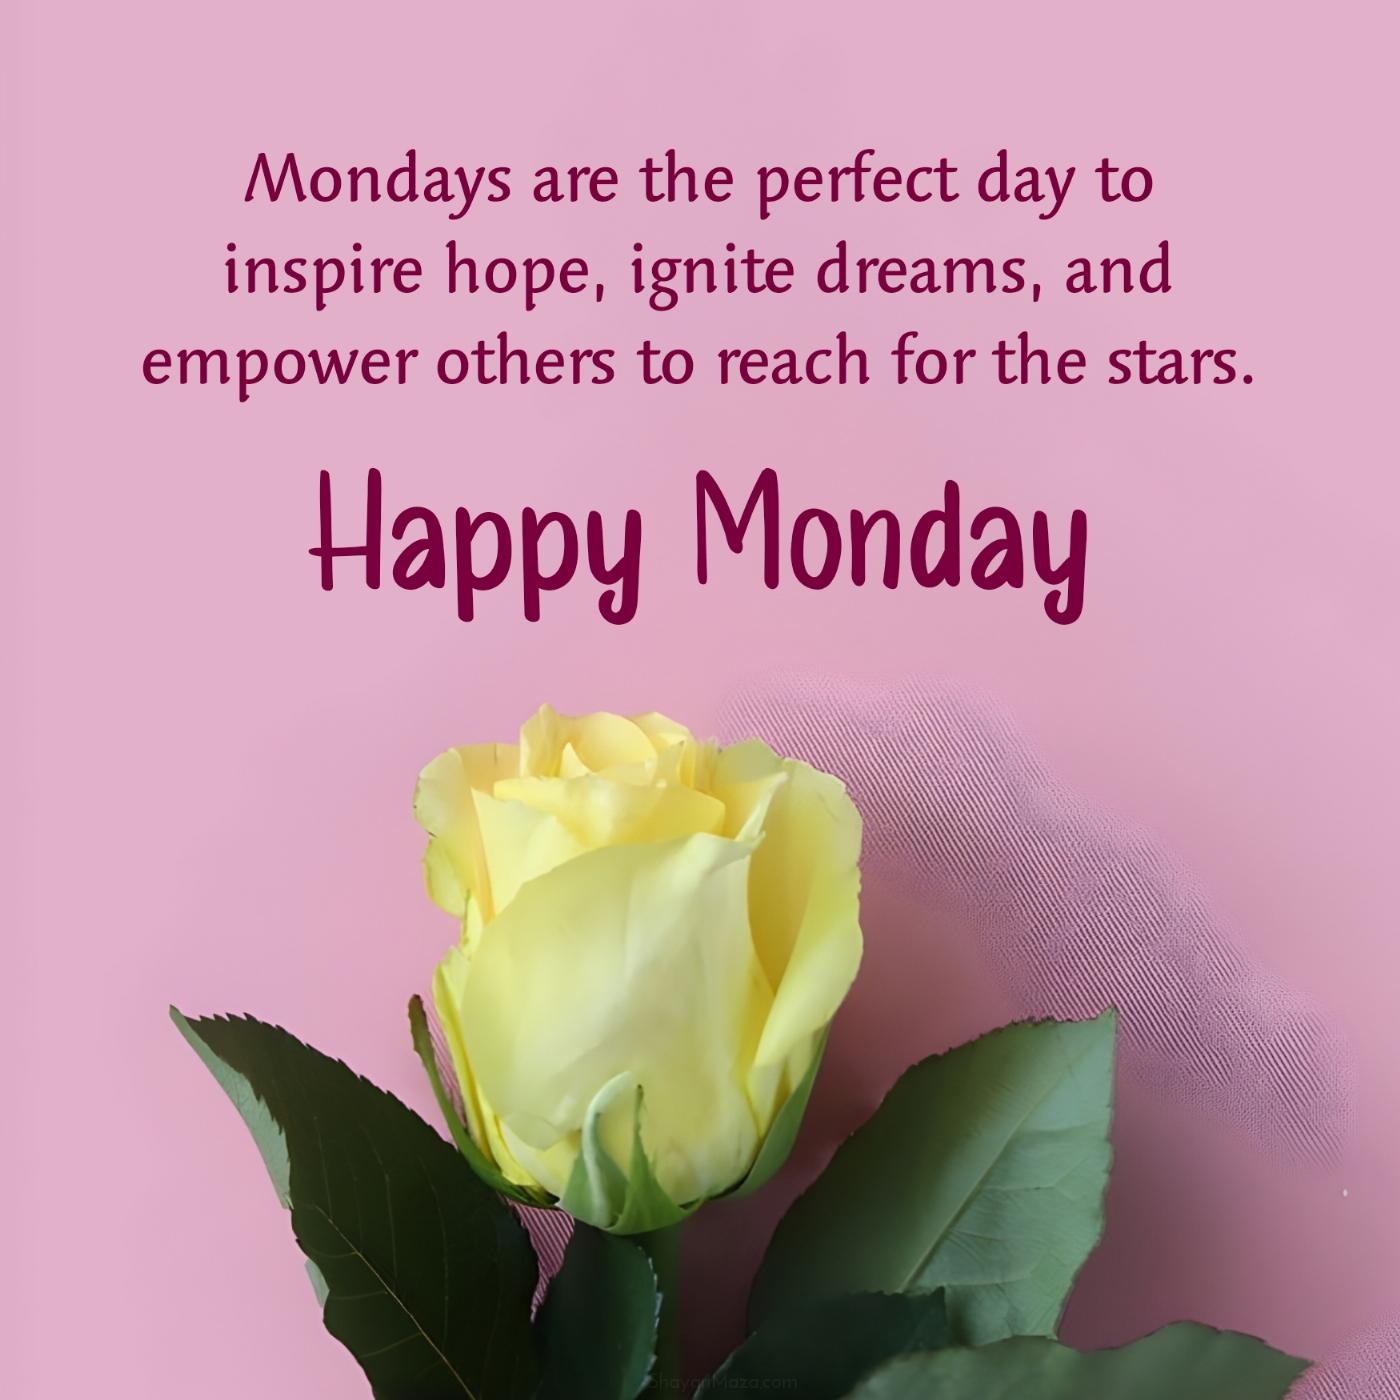 Mondays are the perfect day to inspire hope ignite dreams